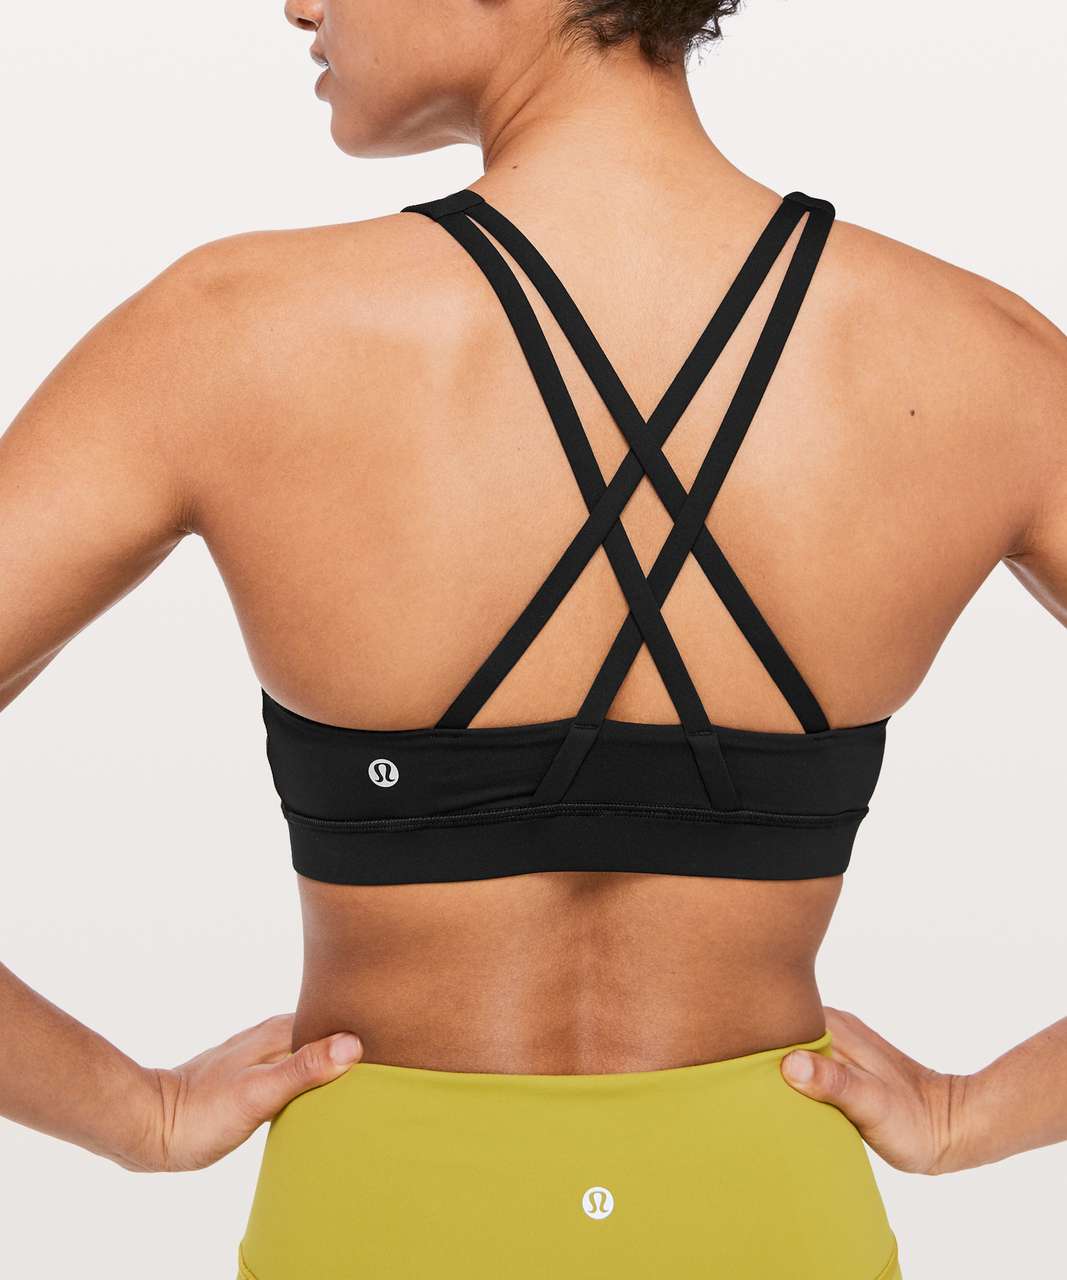 jessicaboone1 is wearing the Energy Bra High Neck LL * Rib in